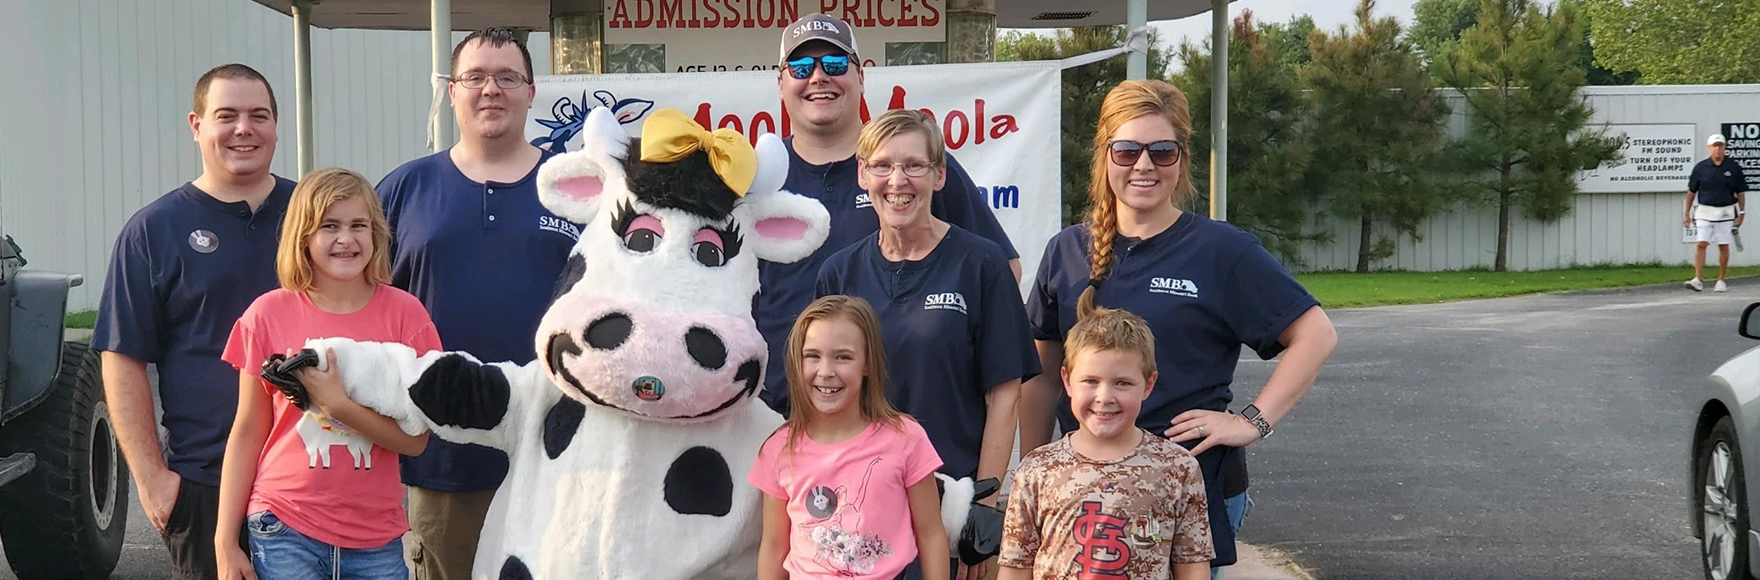 a group of people taking a picture with a cow mascot